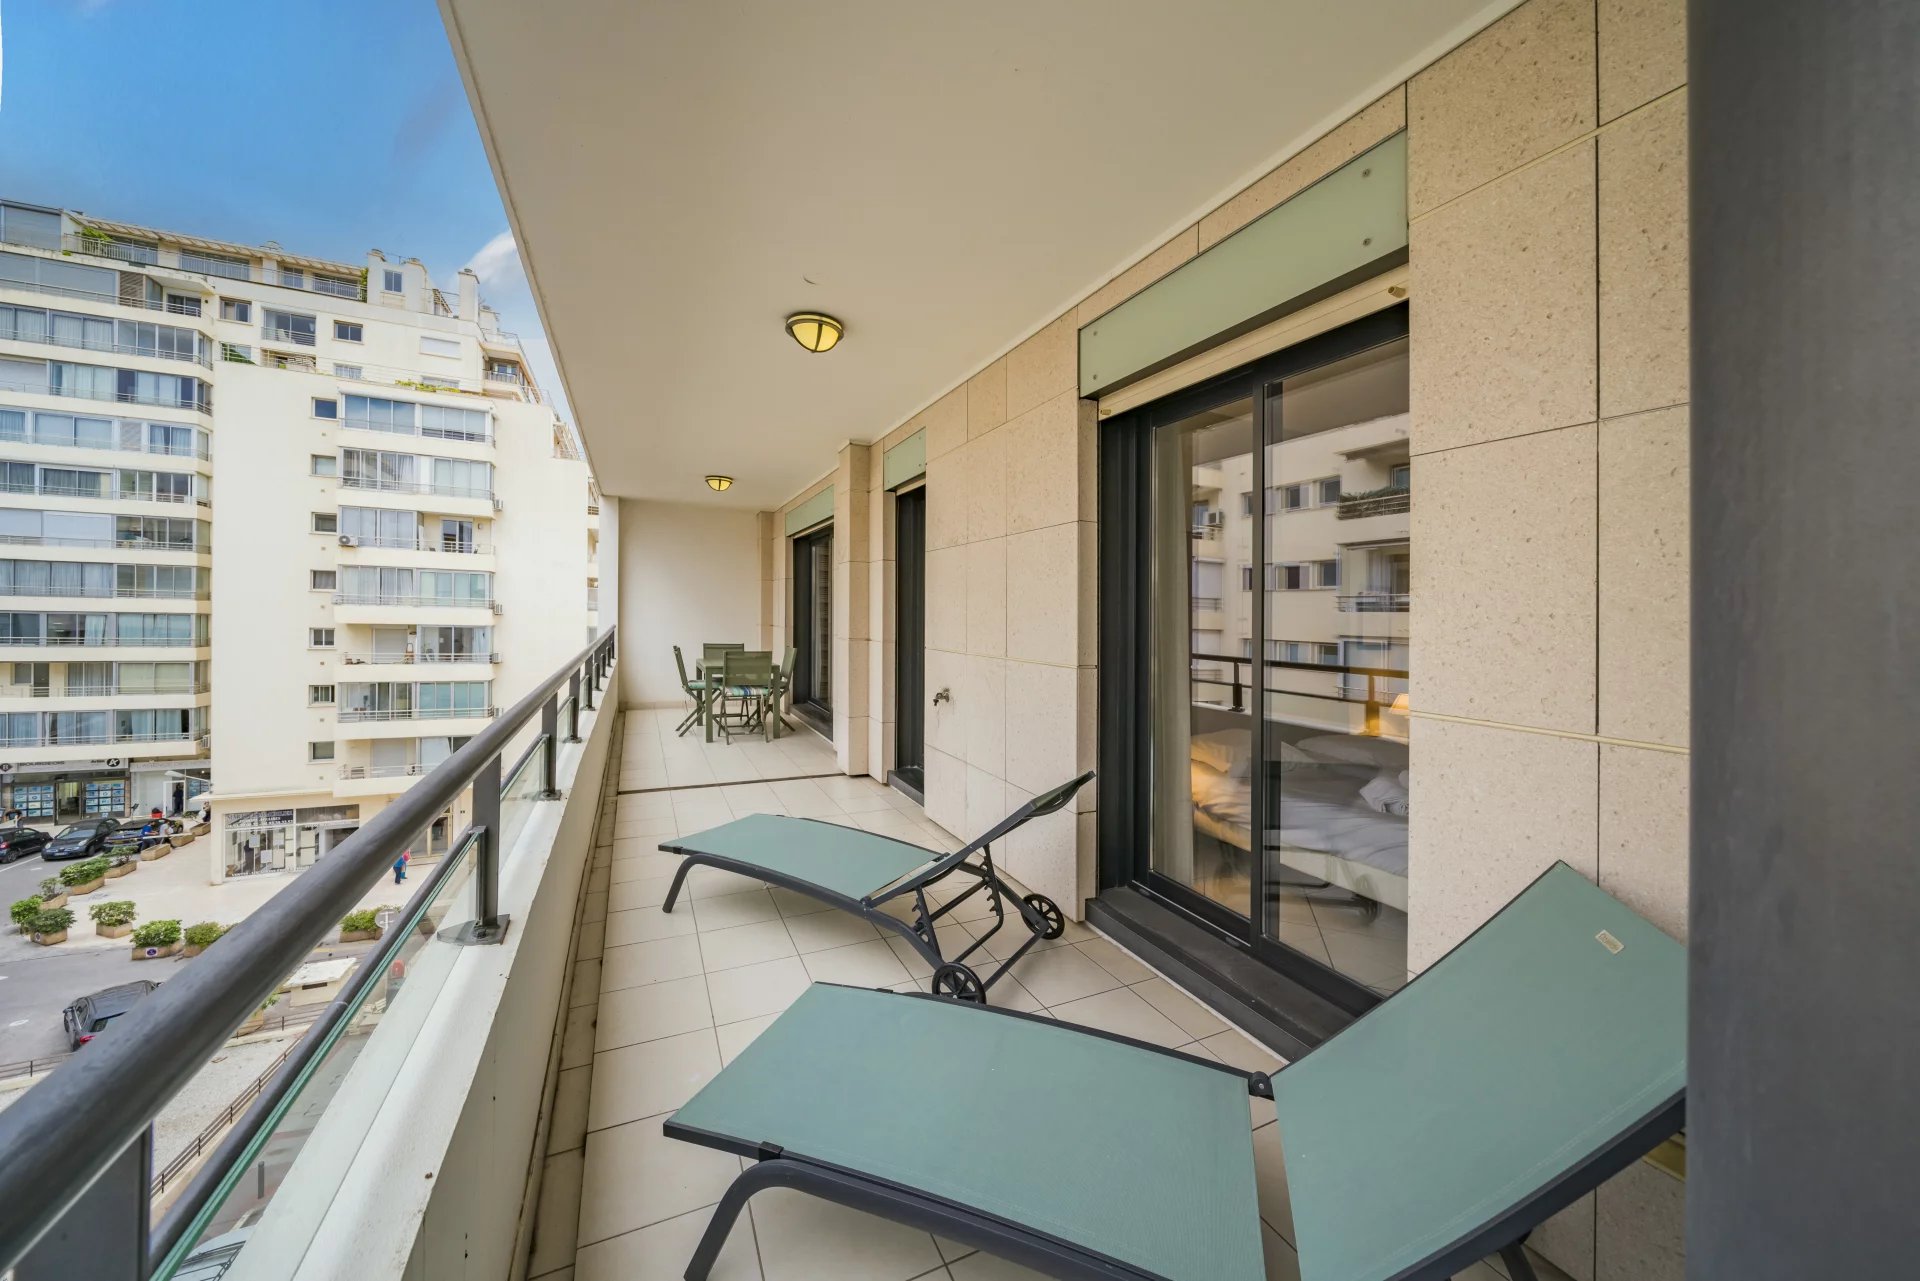 Rental apartment Cannes center next to Croisette and convention center